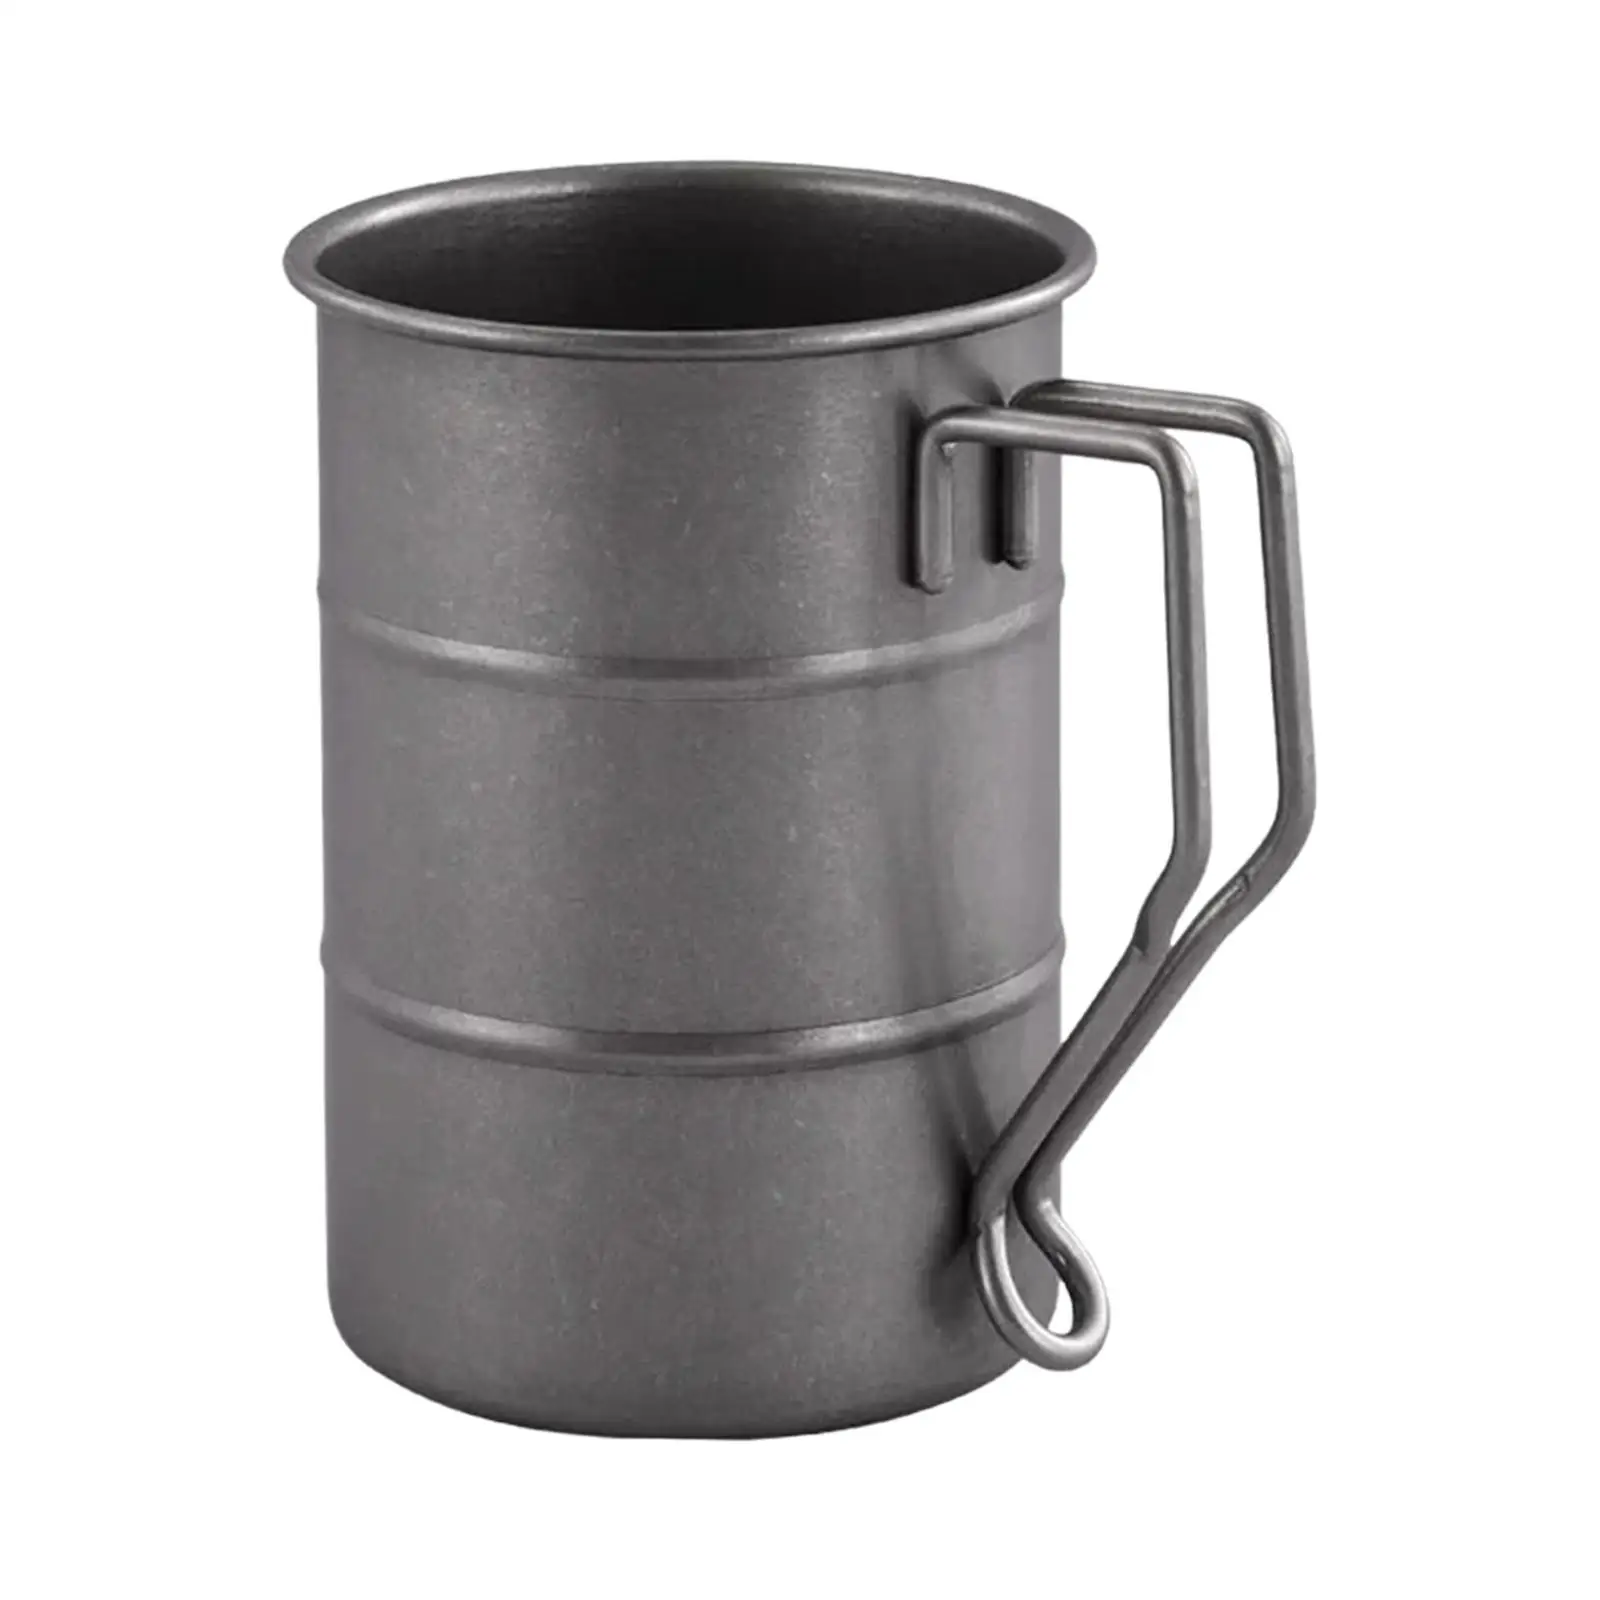 Tea Mugs Drinkware Gargle Cups Water Drinks Cup with Handle 350ml Drinking Cup for Outdoor Backpacking Kitchen BBQ Travel